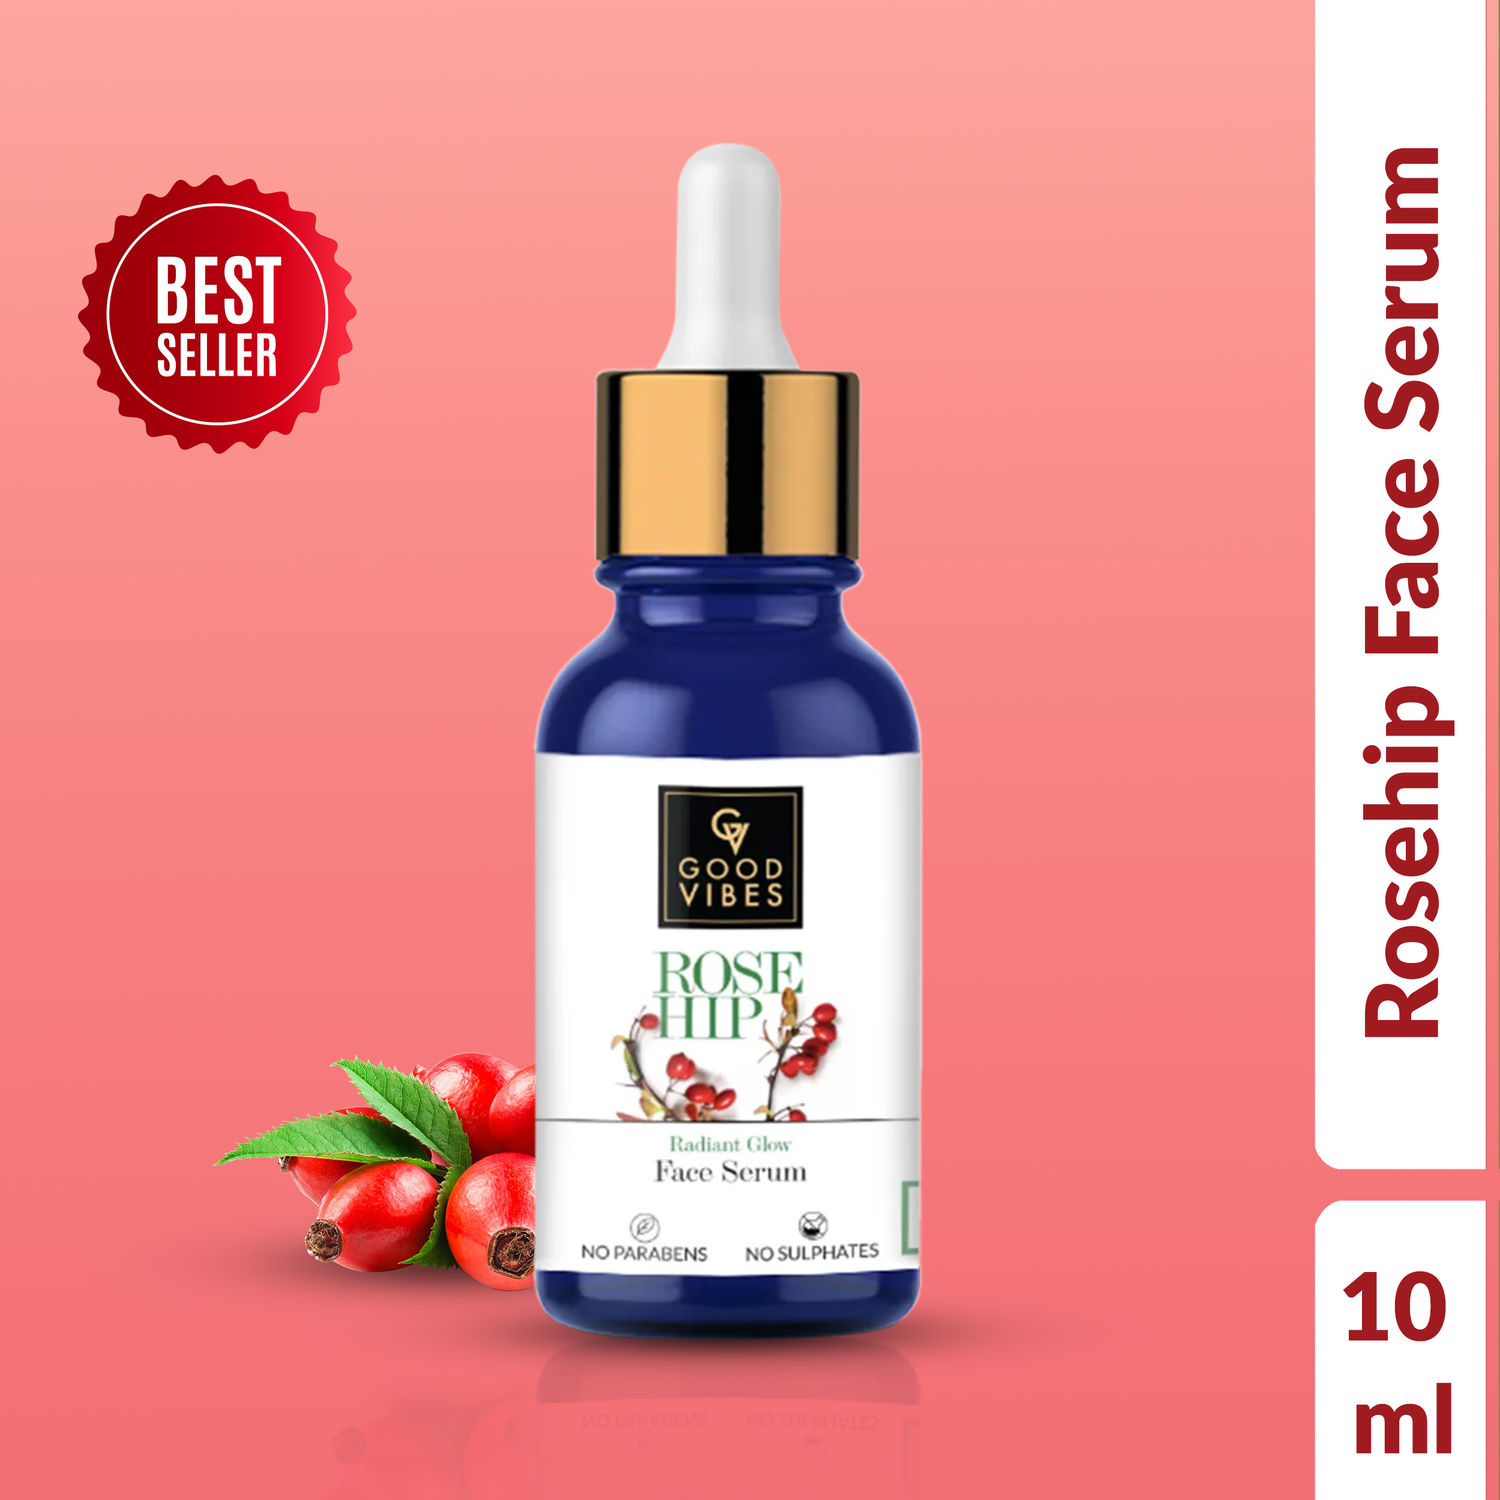 Good Vibes Rosehip Radiant Glow Face Serum | Light, Non-Sticky, Brightening | With Vitamin E | No Parabens, No Sulphates, No Animal Testing (10 ml)